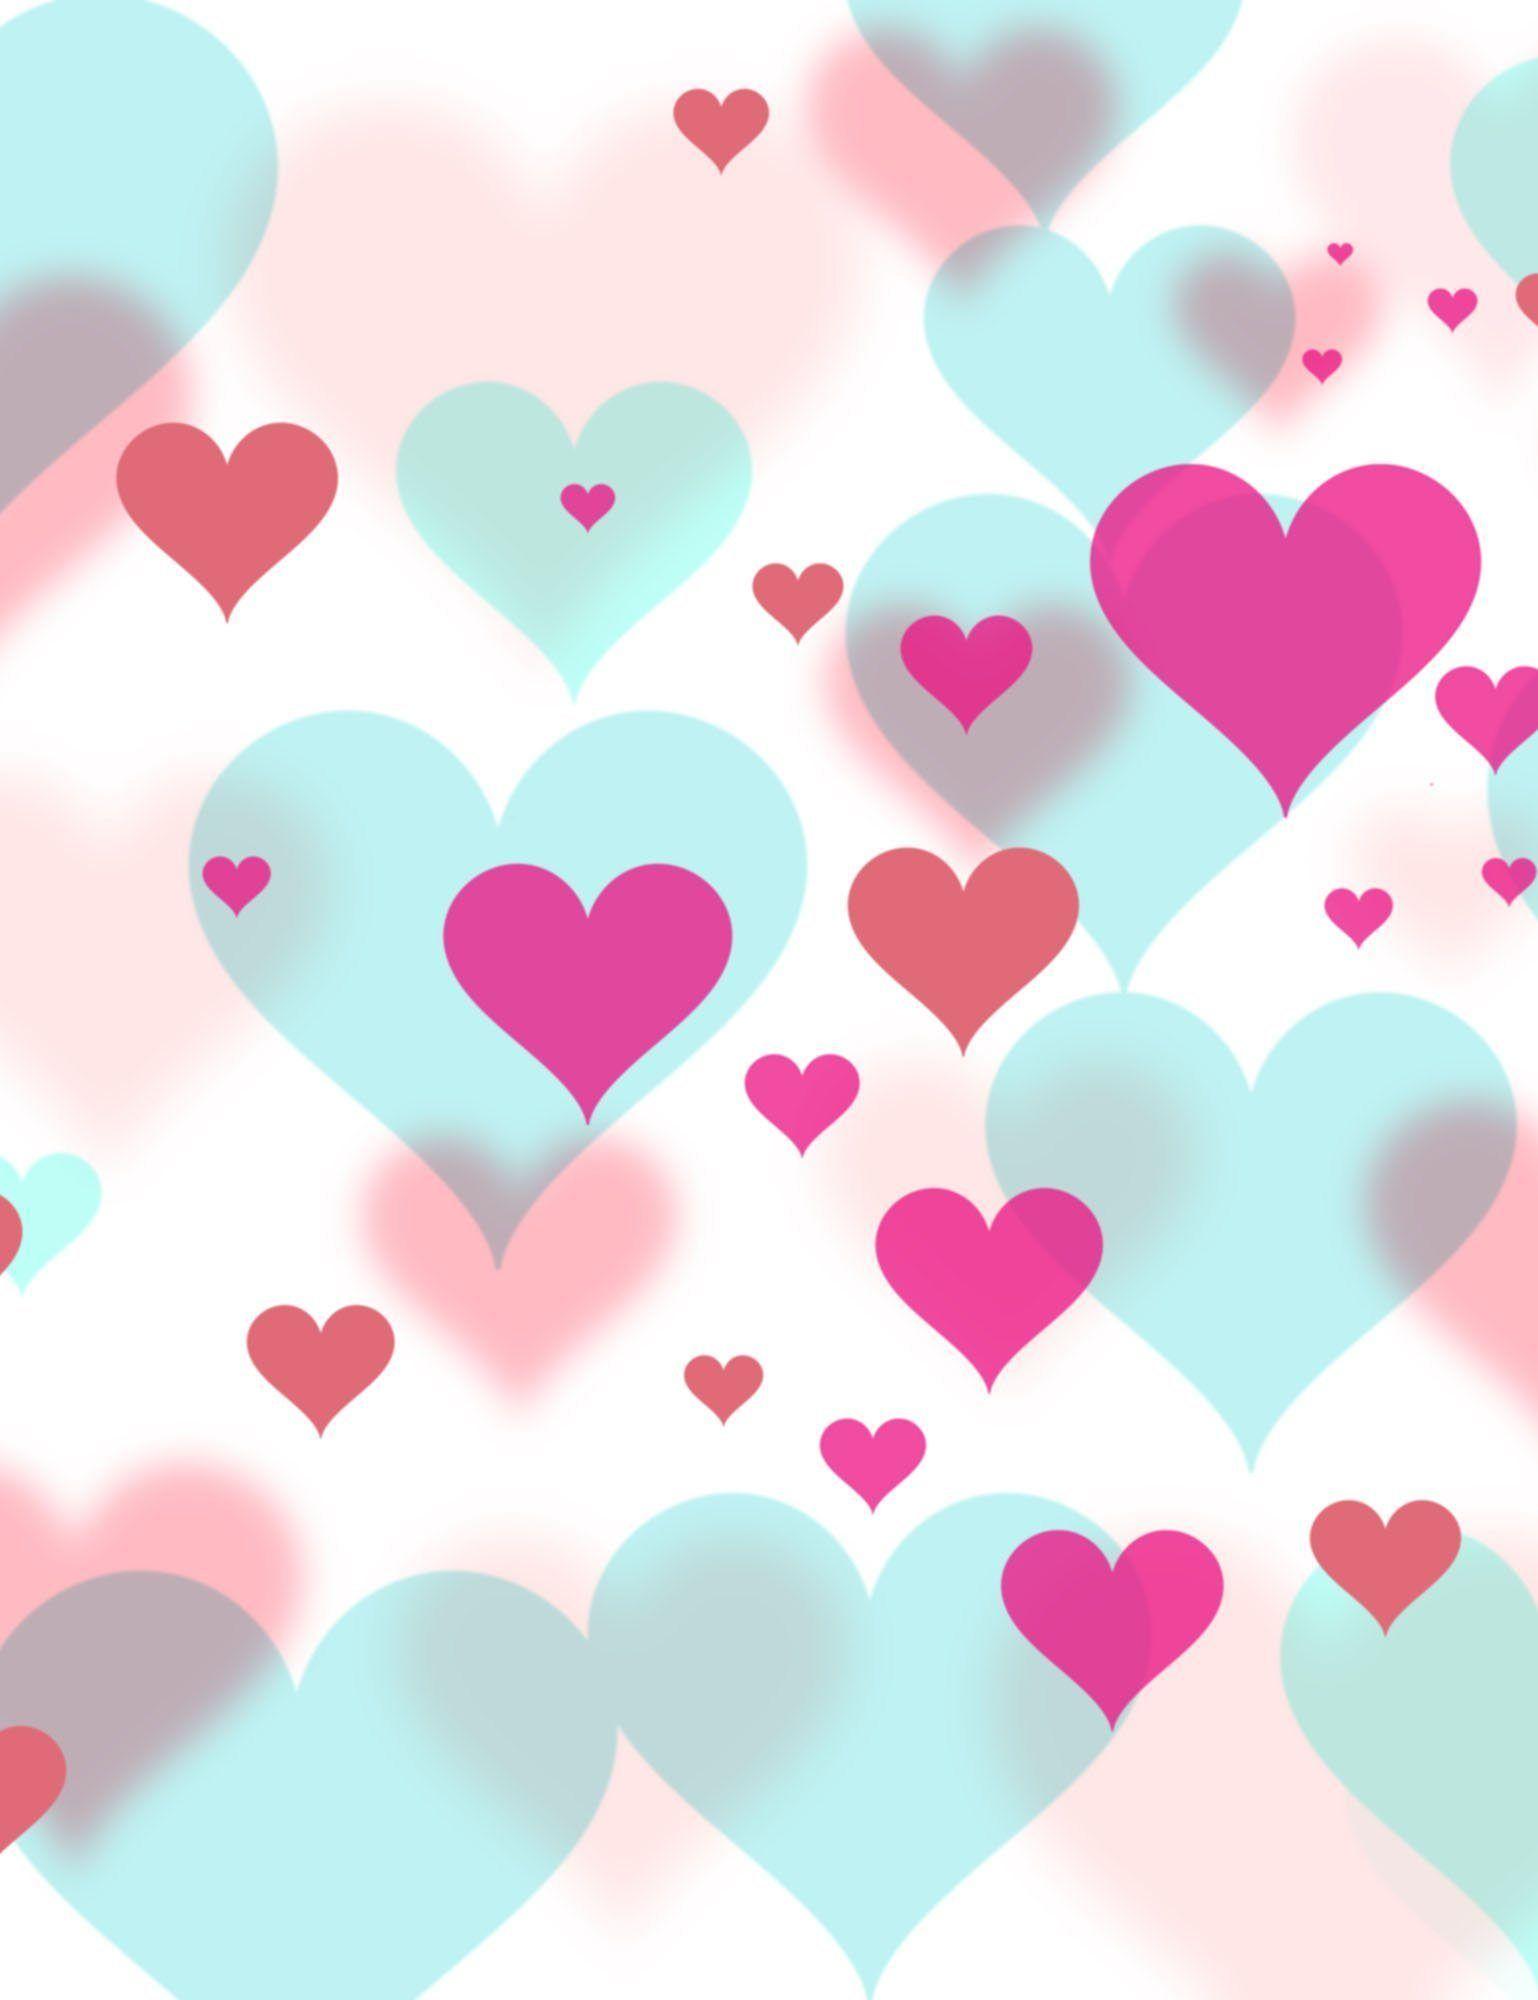 Pink And Red Hearts Printed On Bokeh Hearts Background For Holiday